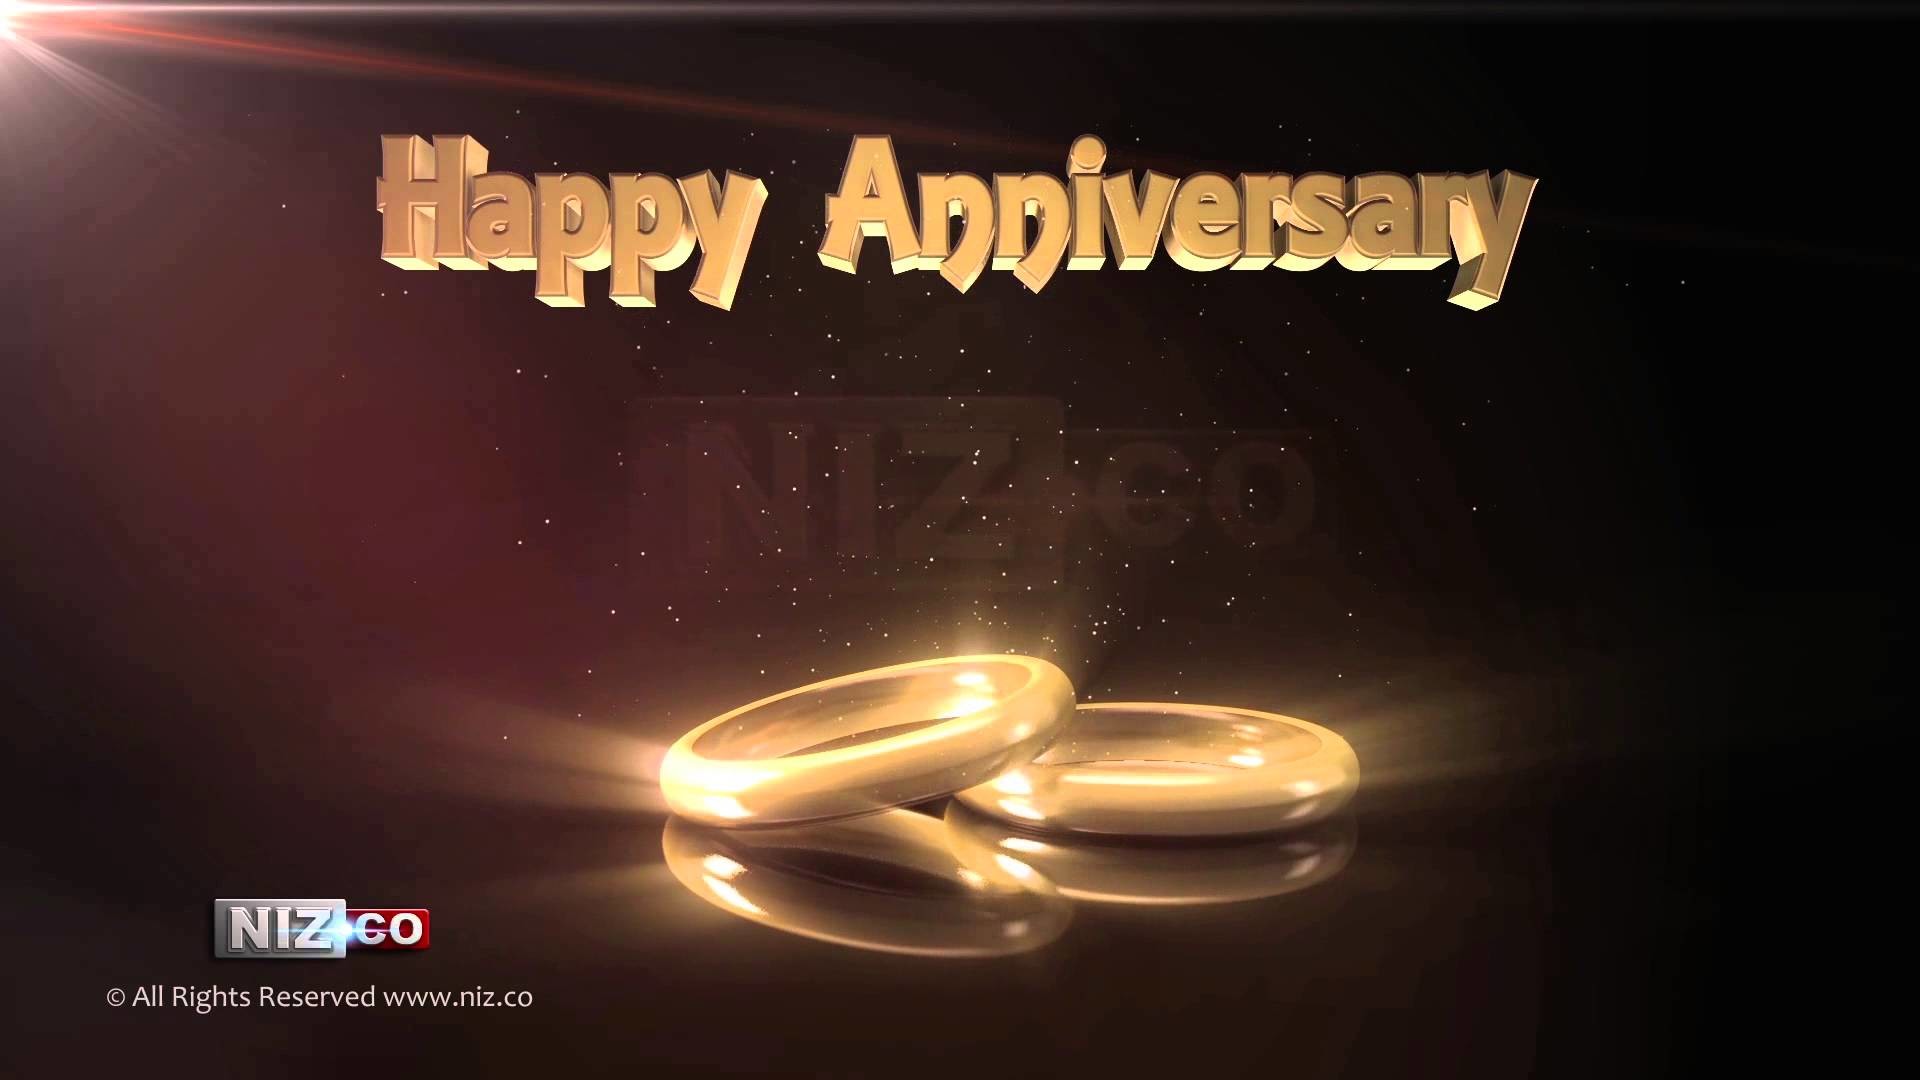 1920x1080 shining rings happy anniversary - Royalty FREE Background Loop HD 1080p -  YouTube